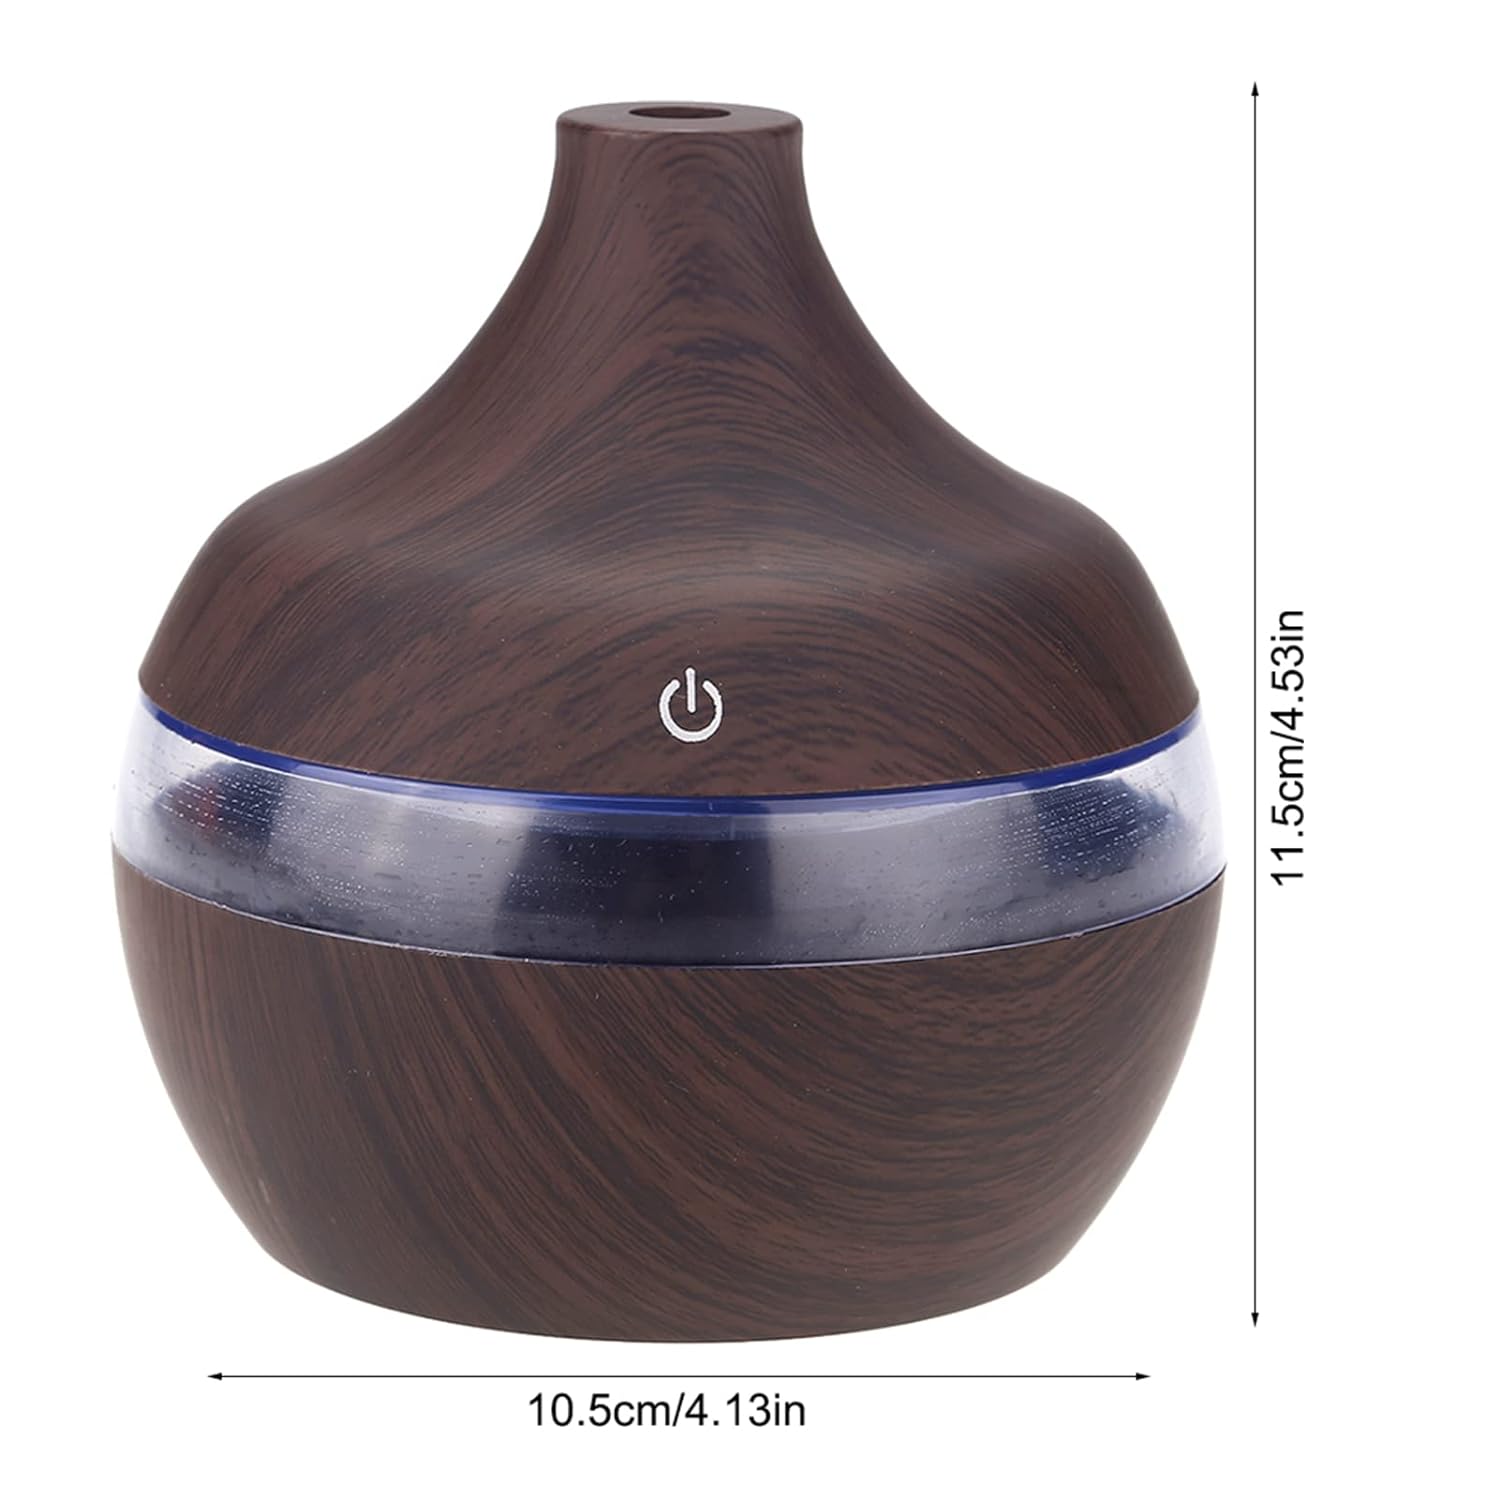 Portable Small Humidifier for Bedroom Plant Mini Humidifier for Office Home Desktop, 300ML Ultra Quiet Personal Cool Mist Air Oil Diffuser with 7 Colors Night Light for Baby, USB Charging Wooden Grain